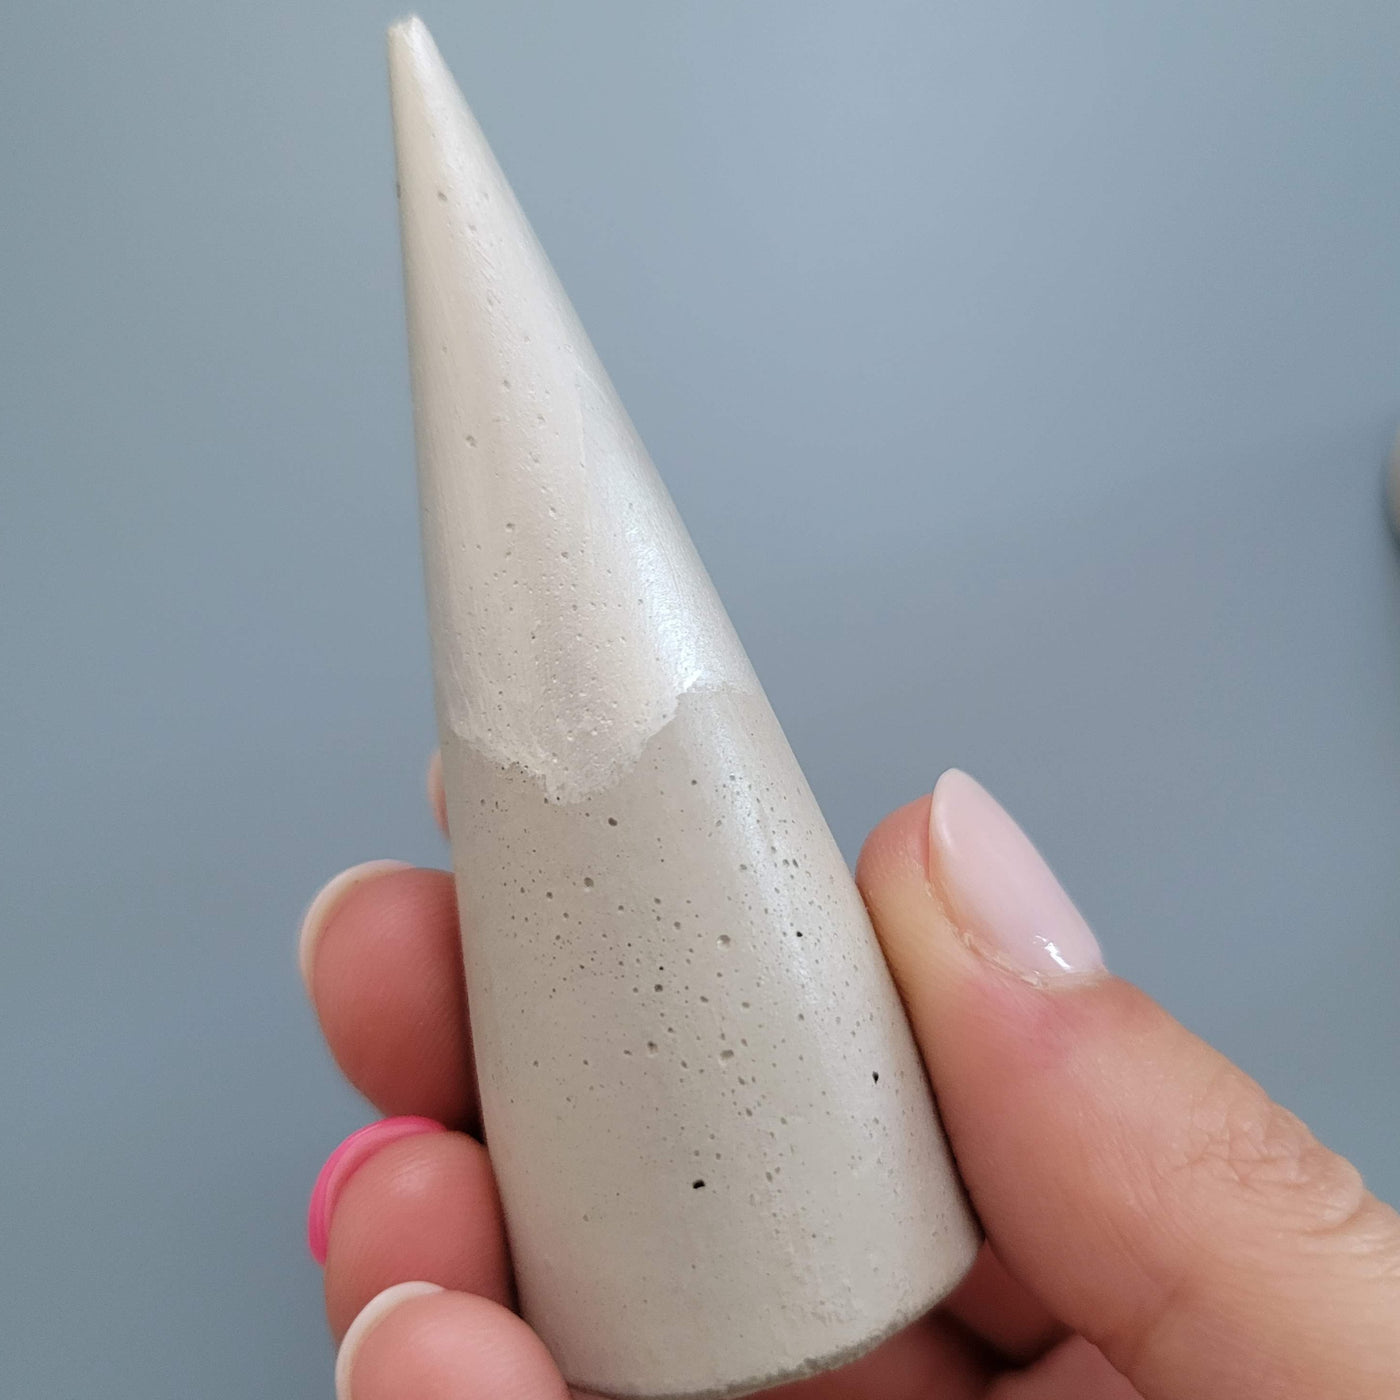 Concrete ring cone dipped in silver paint at the top; held by a hand for scale, ring cone is approximately the length of a finger